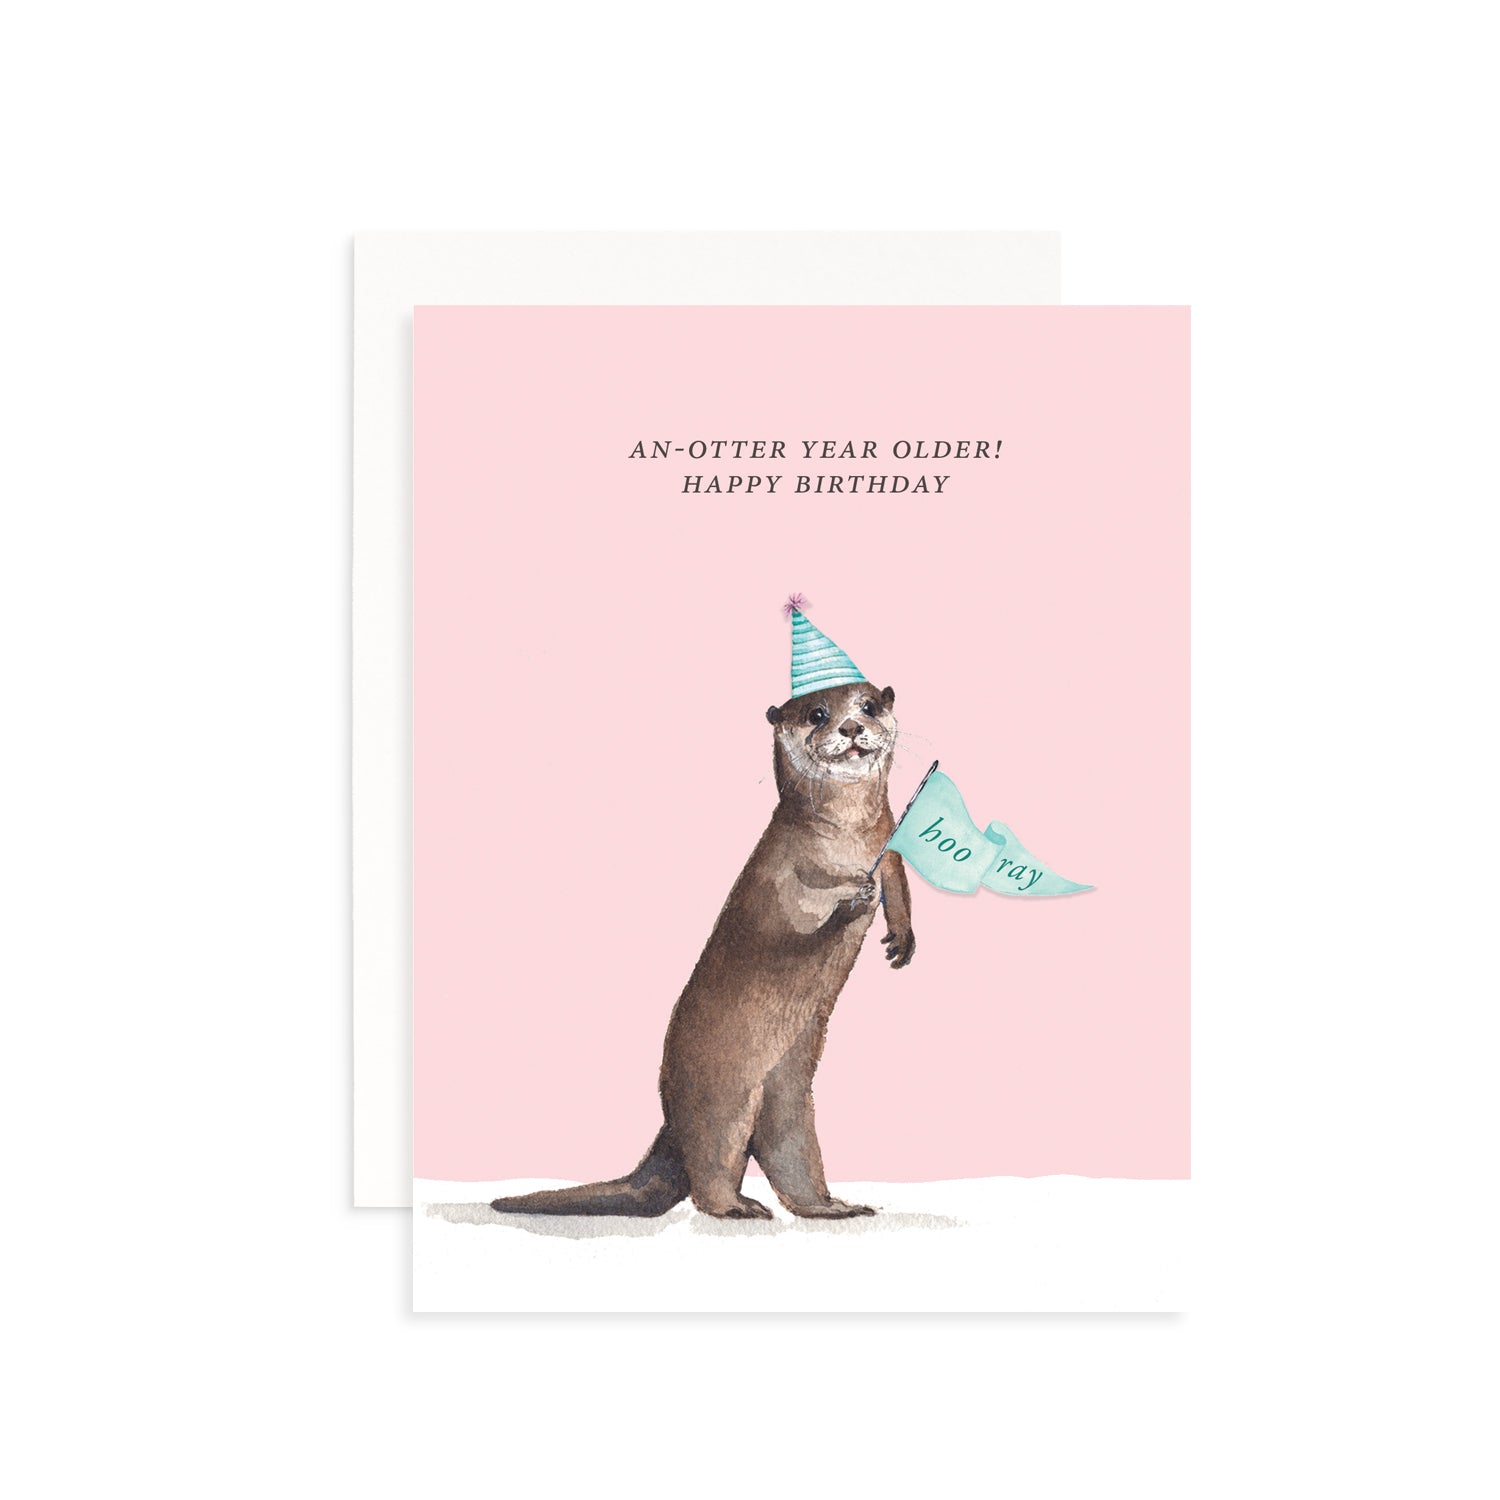 An-Otter Year Older! Happy Birthday Greeting Card